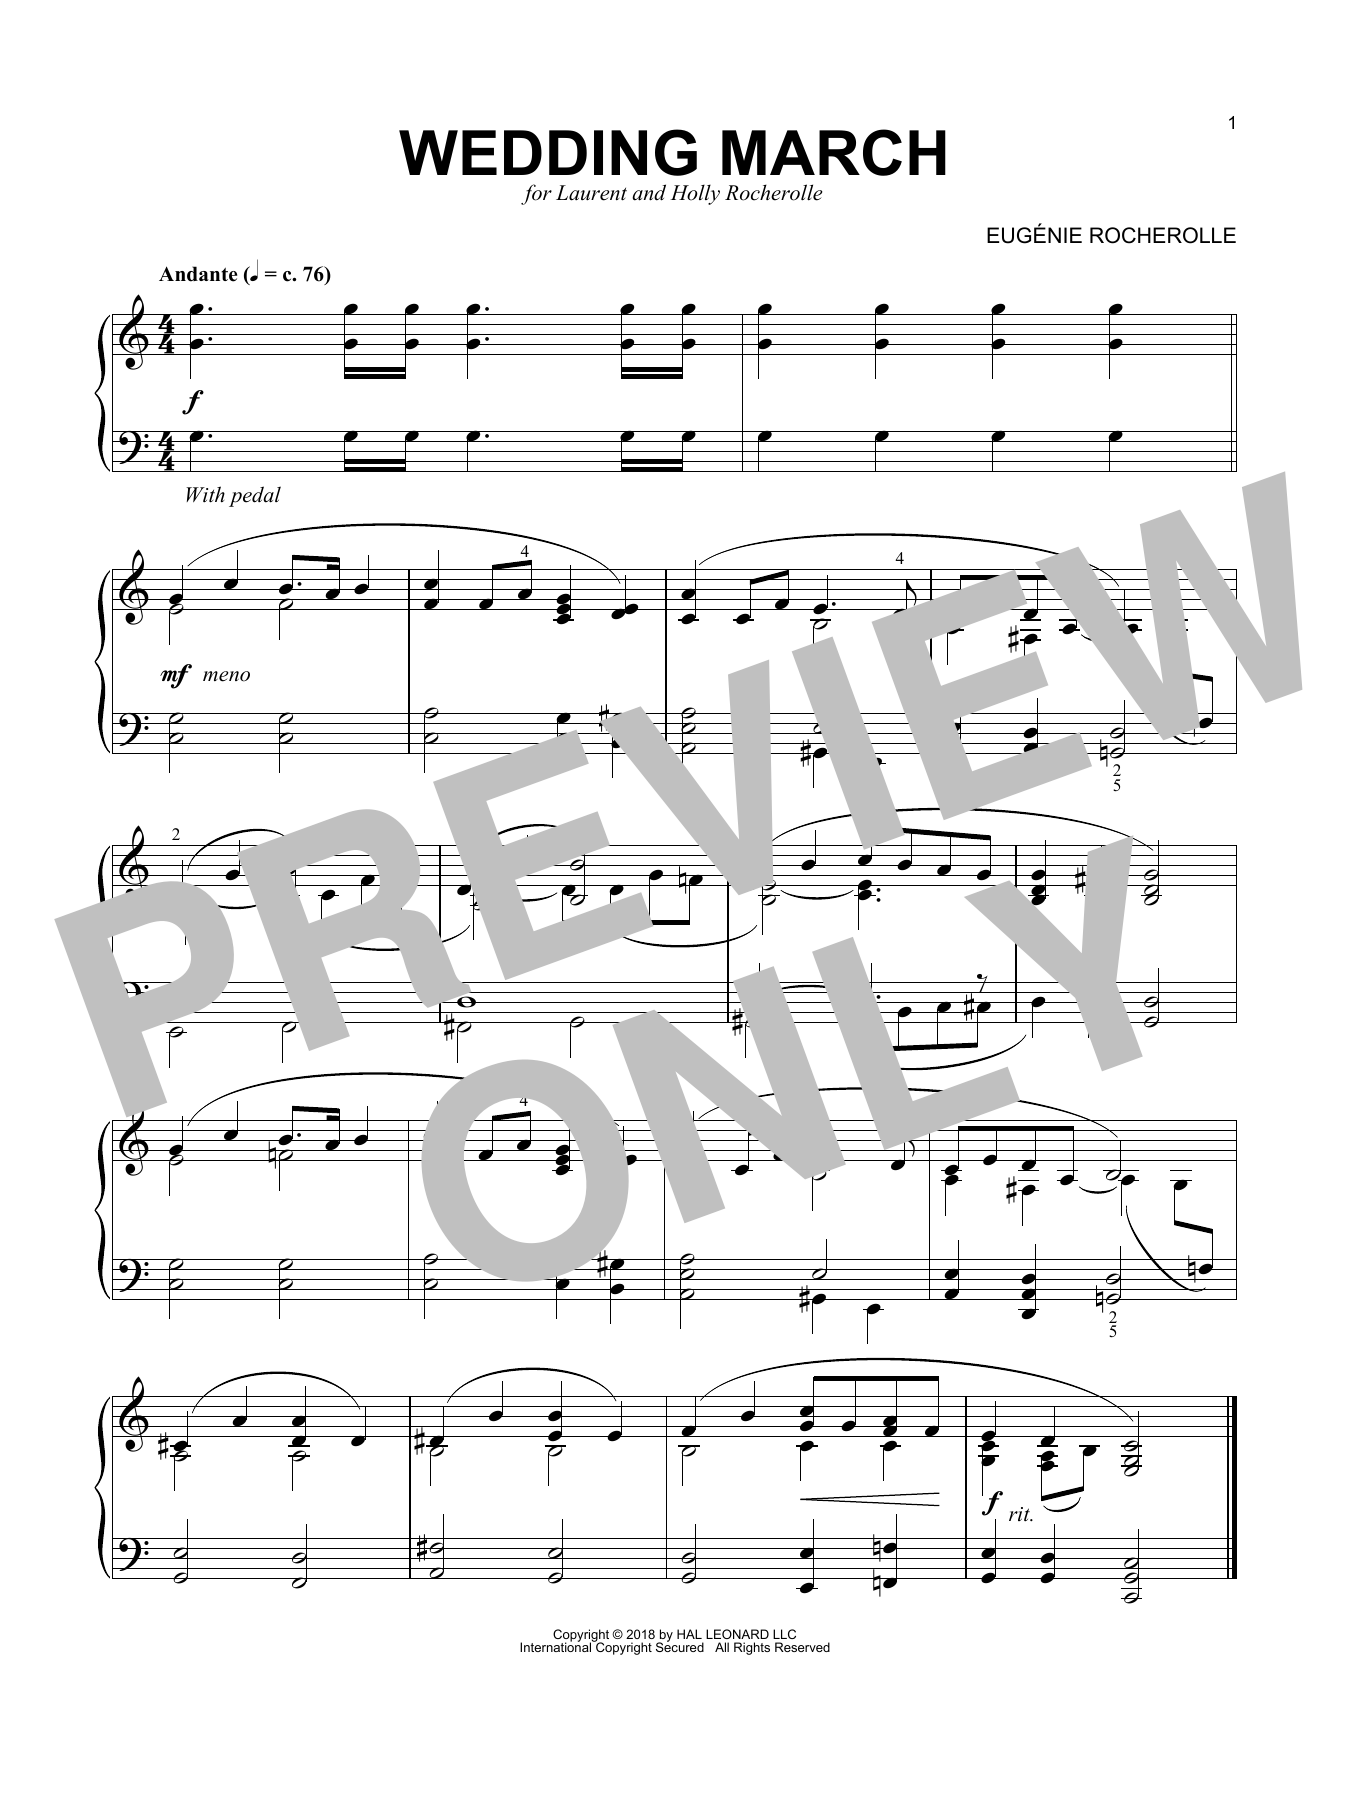 Eugenie Rocherolle Wedding March sheet music notes and chords. Download Printable PDF.